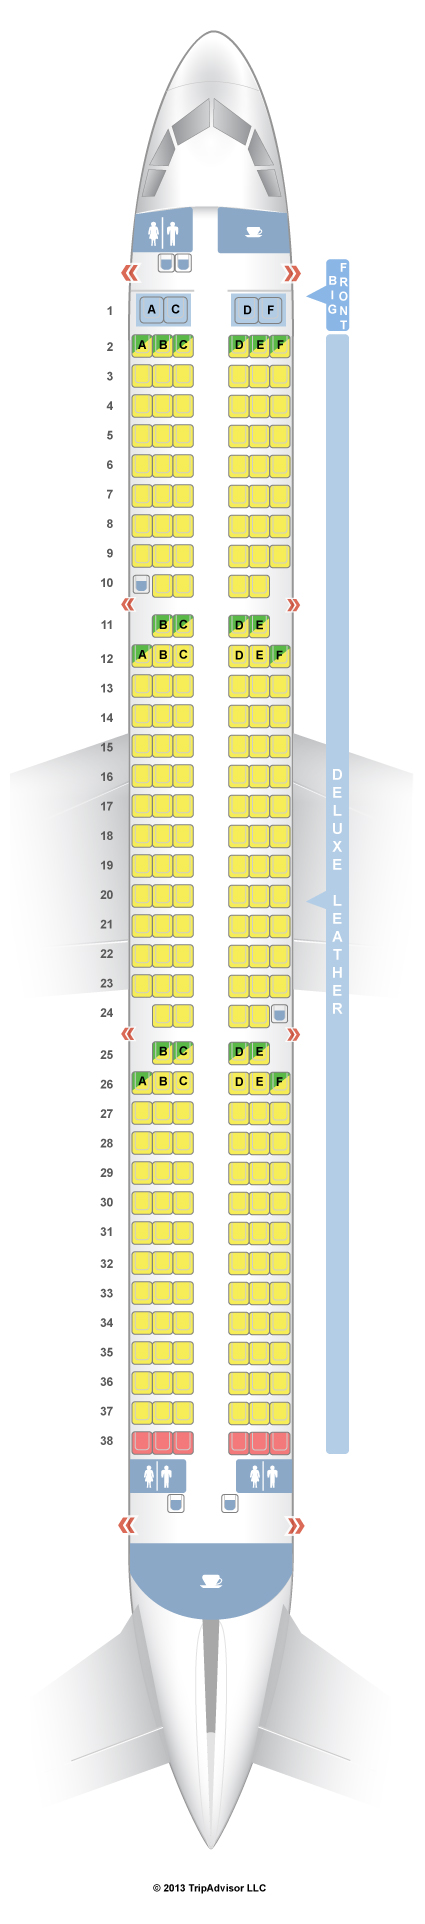 seat assignments spirit airlines